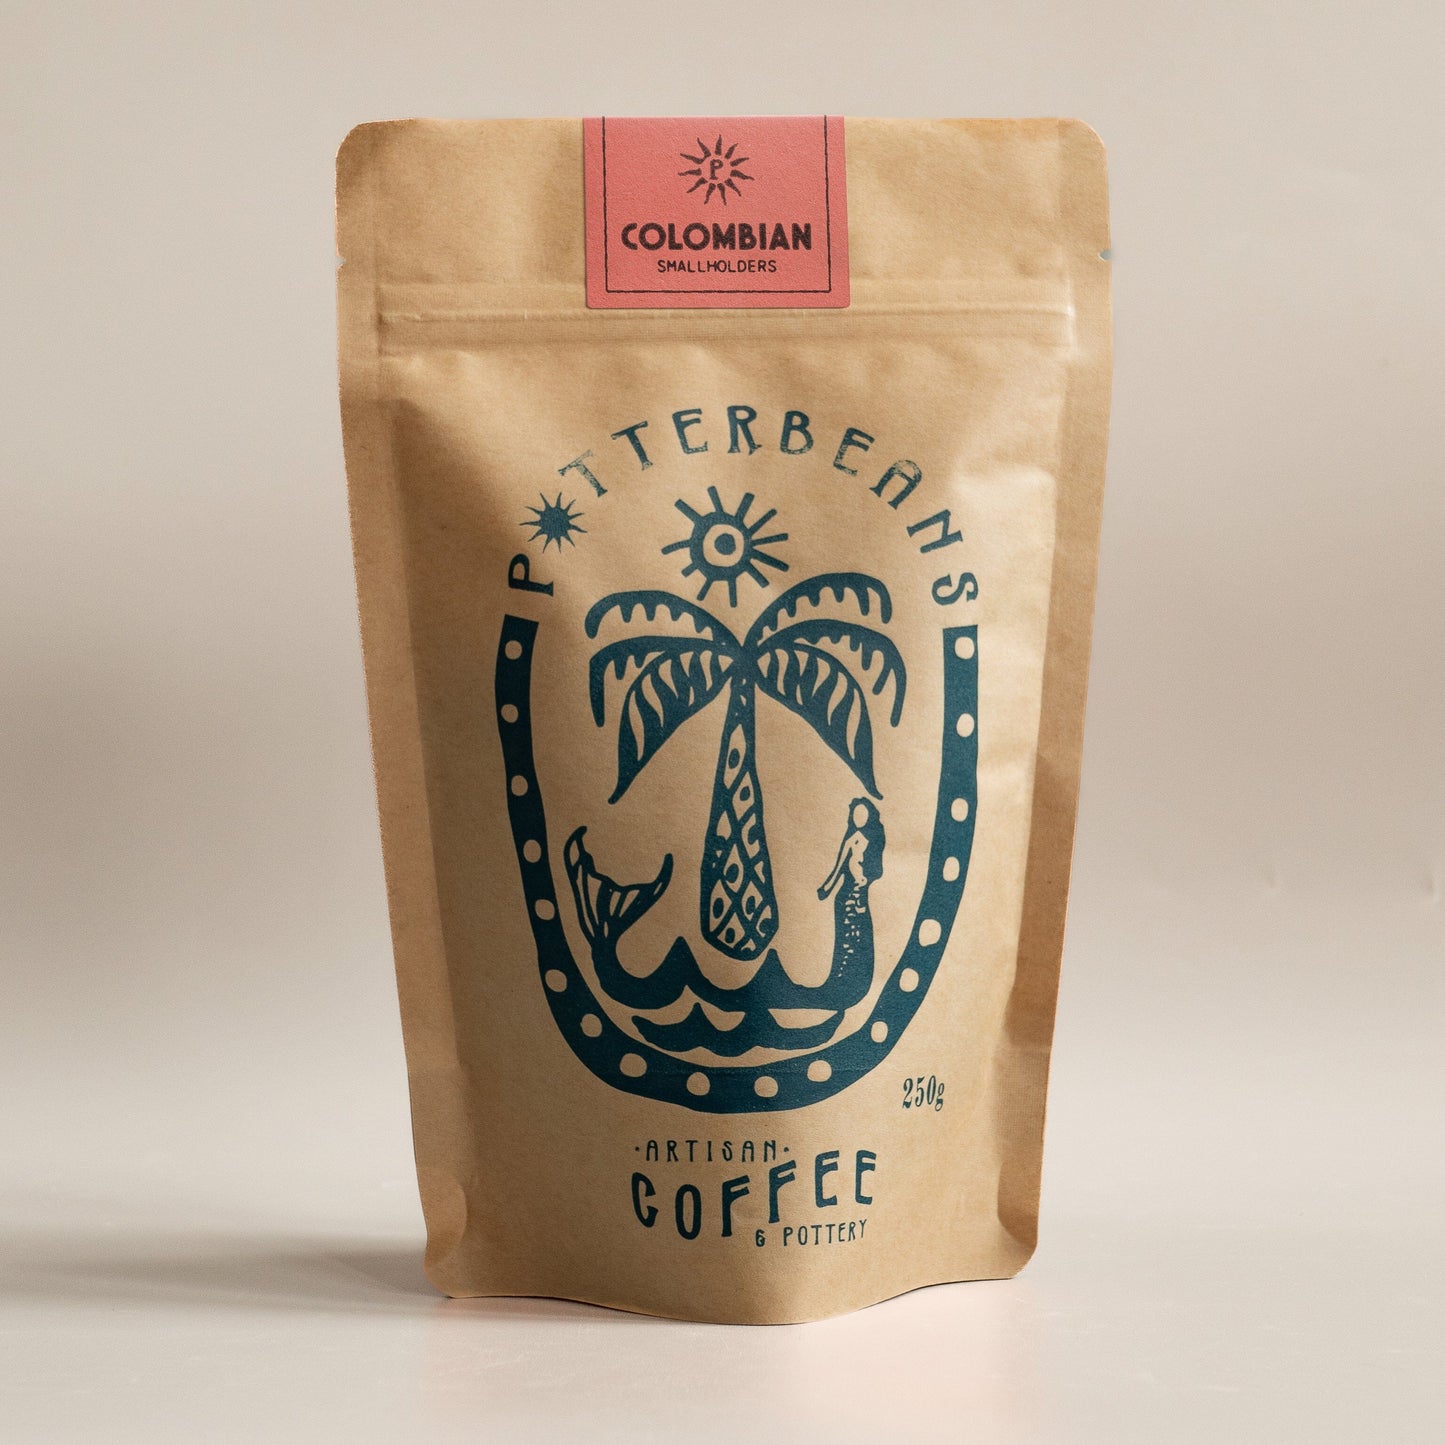 Speciality coffee from Colombia, smallholders.